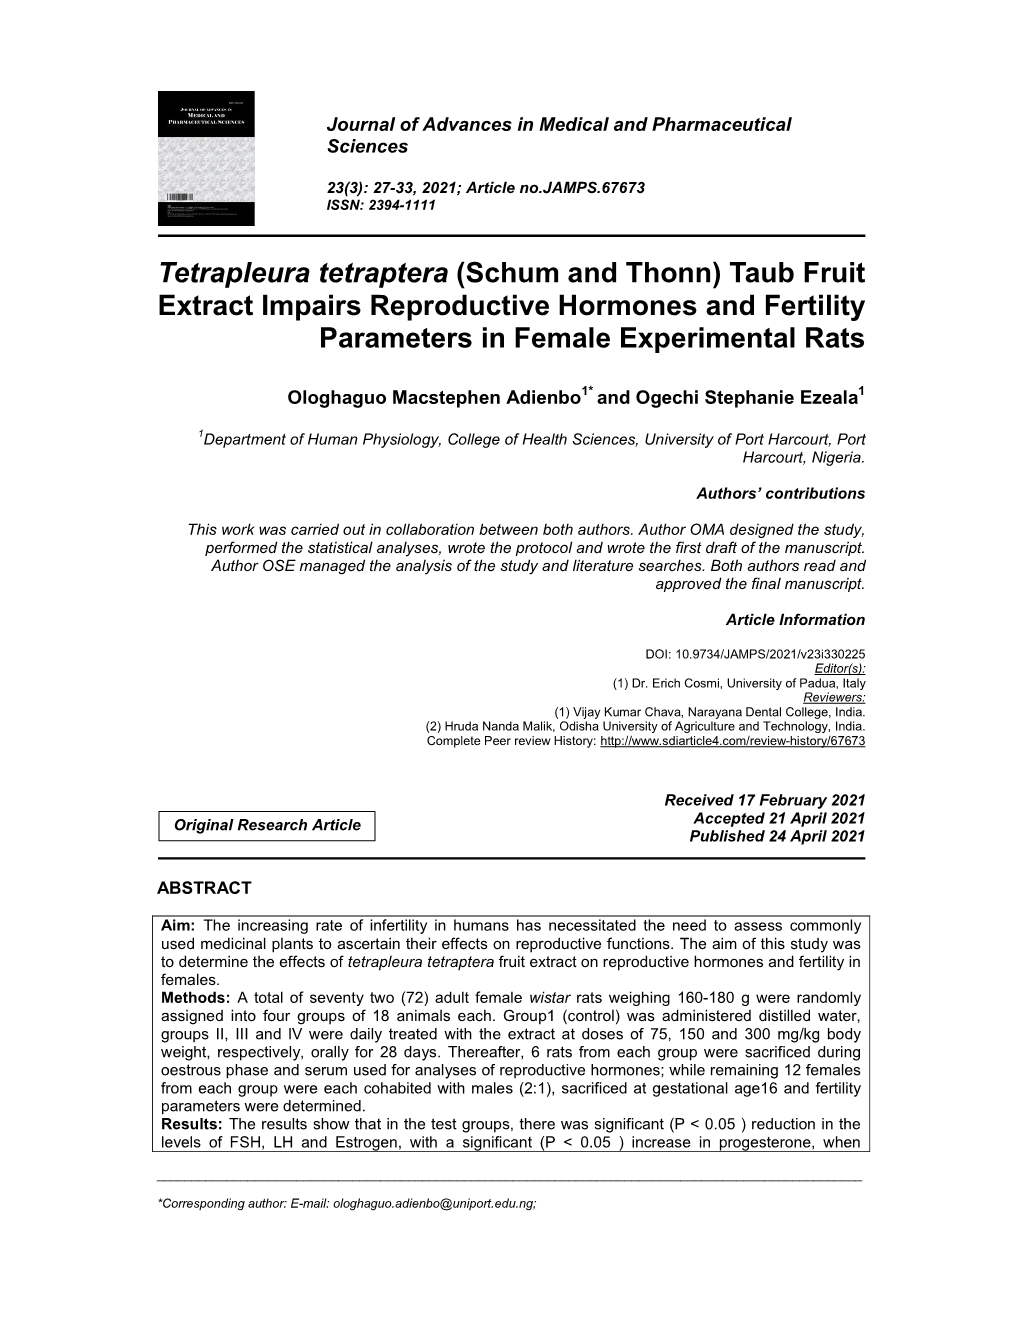 Tetrapleura Tetraptera (Schum and Thonn) Taub Fruit Extract Impairs Reproductive Hormones and Fertility Parameters in Female Experimental Rats